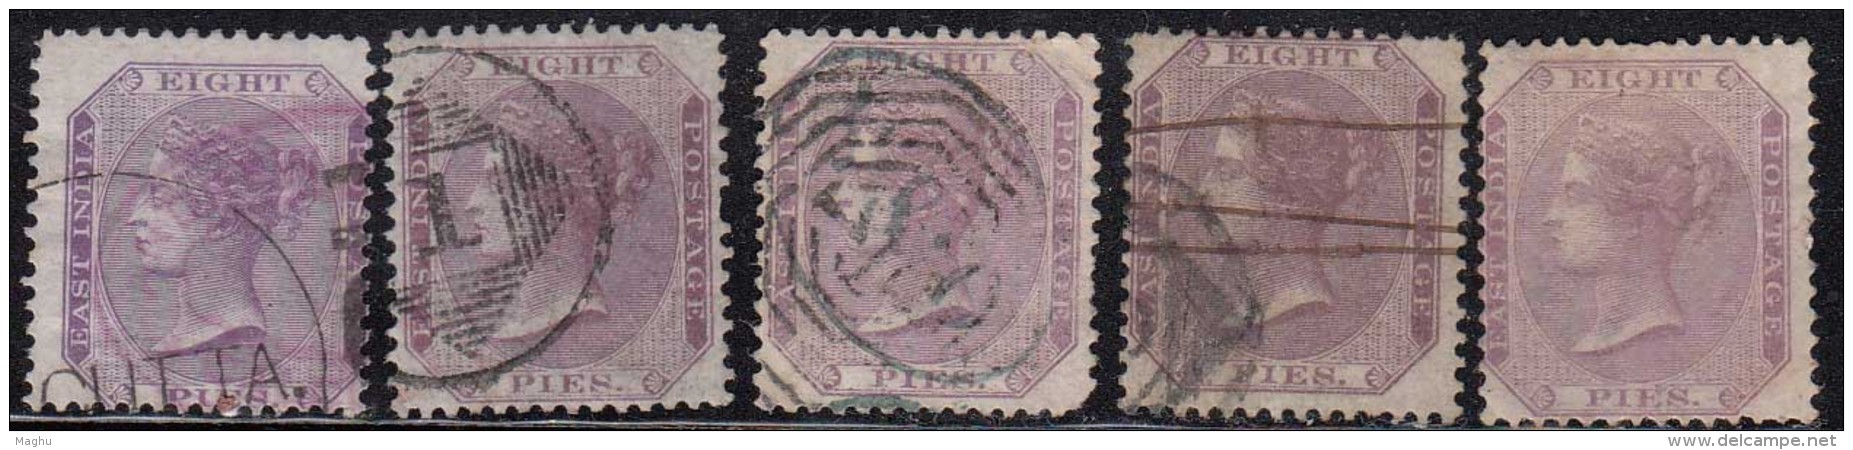 8p X 5 Diff Shades / Variety, Eight Pies , British East India 1860, QV Used, No Watermark - 1854 Britse Indische Compagnie